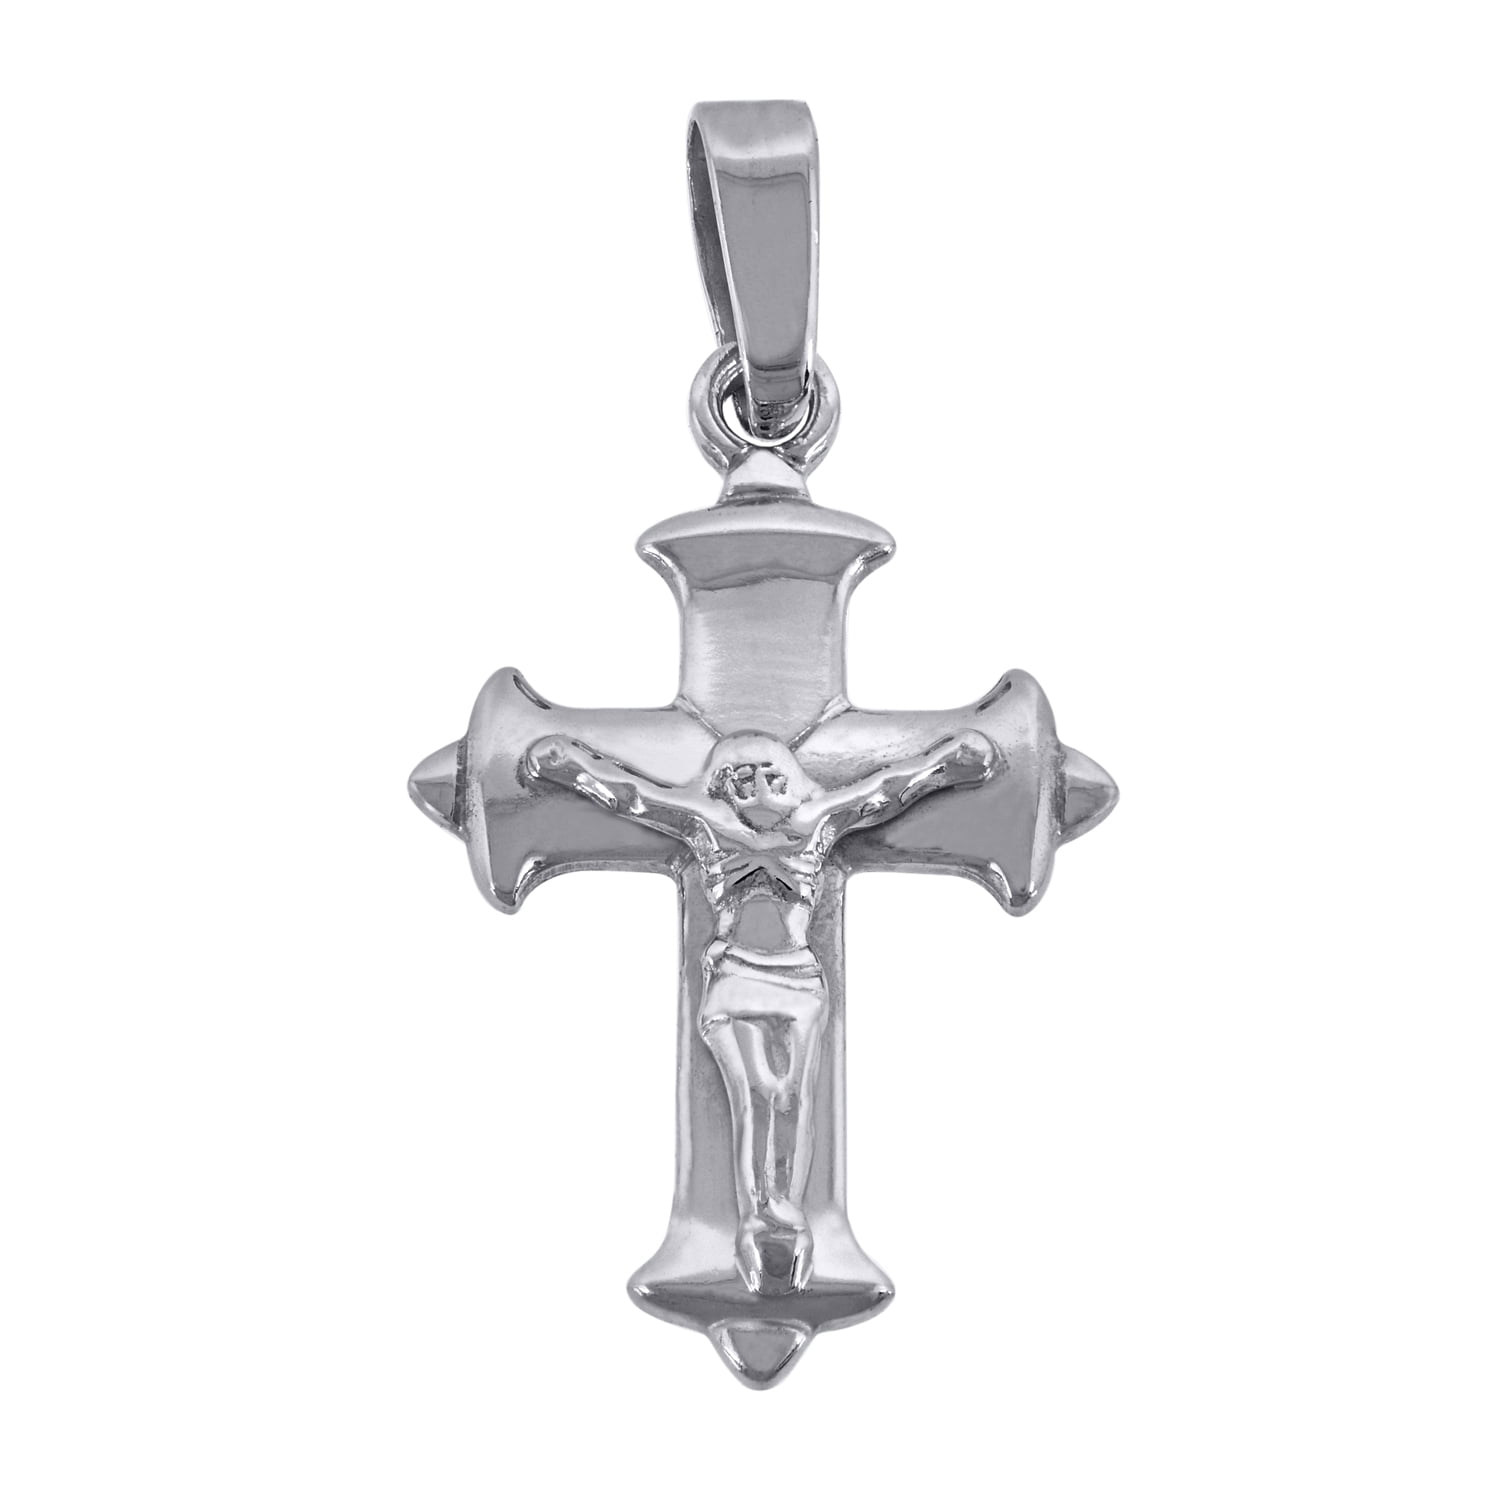 Saris and Things 925 Sterling Silver Womens Mens Unisex Cross Religious Fashion Charm Pendant 